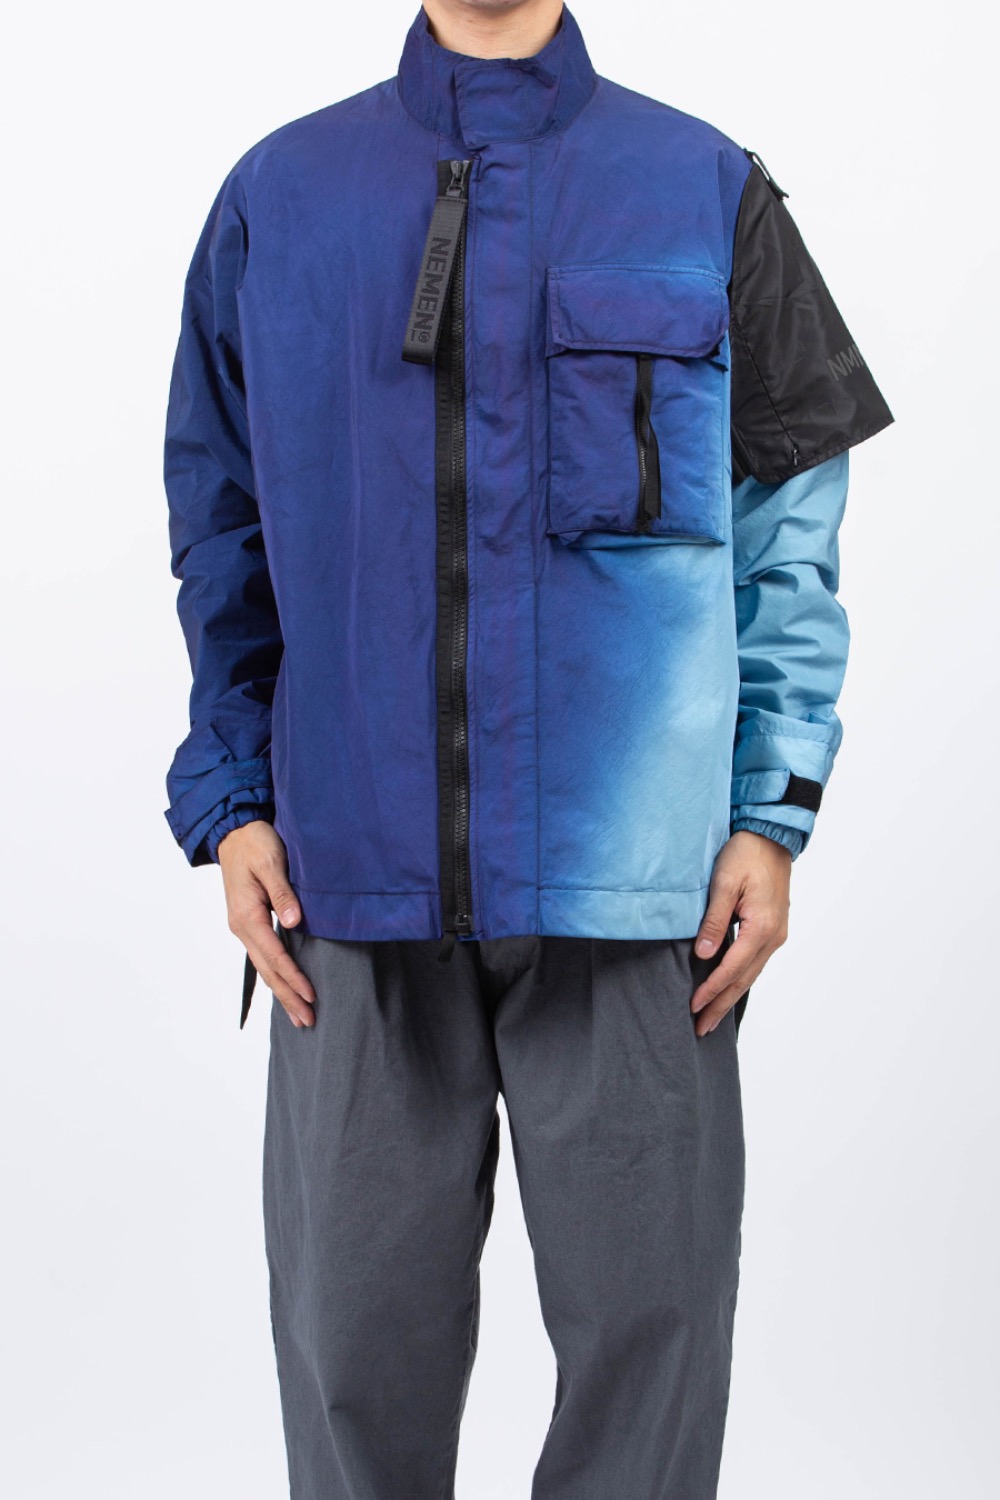 WOVEN ZEPHYR 3L JACKET DIPPING BLUE